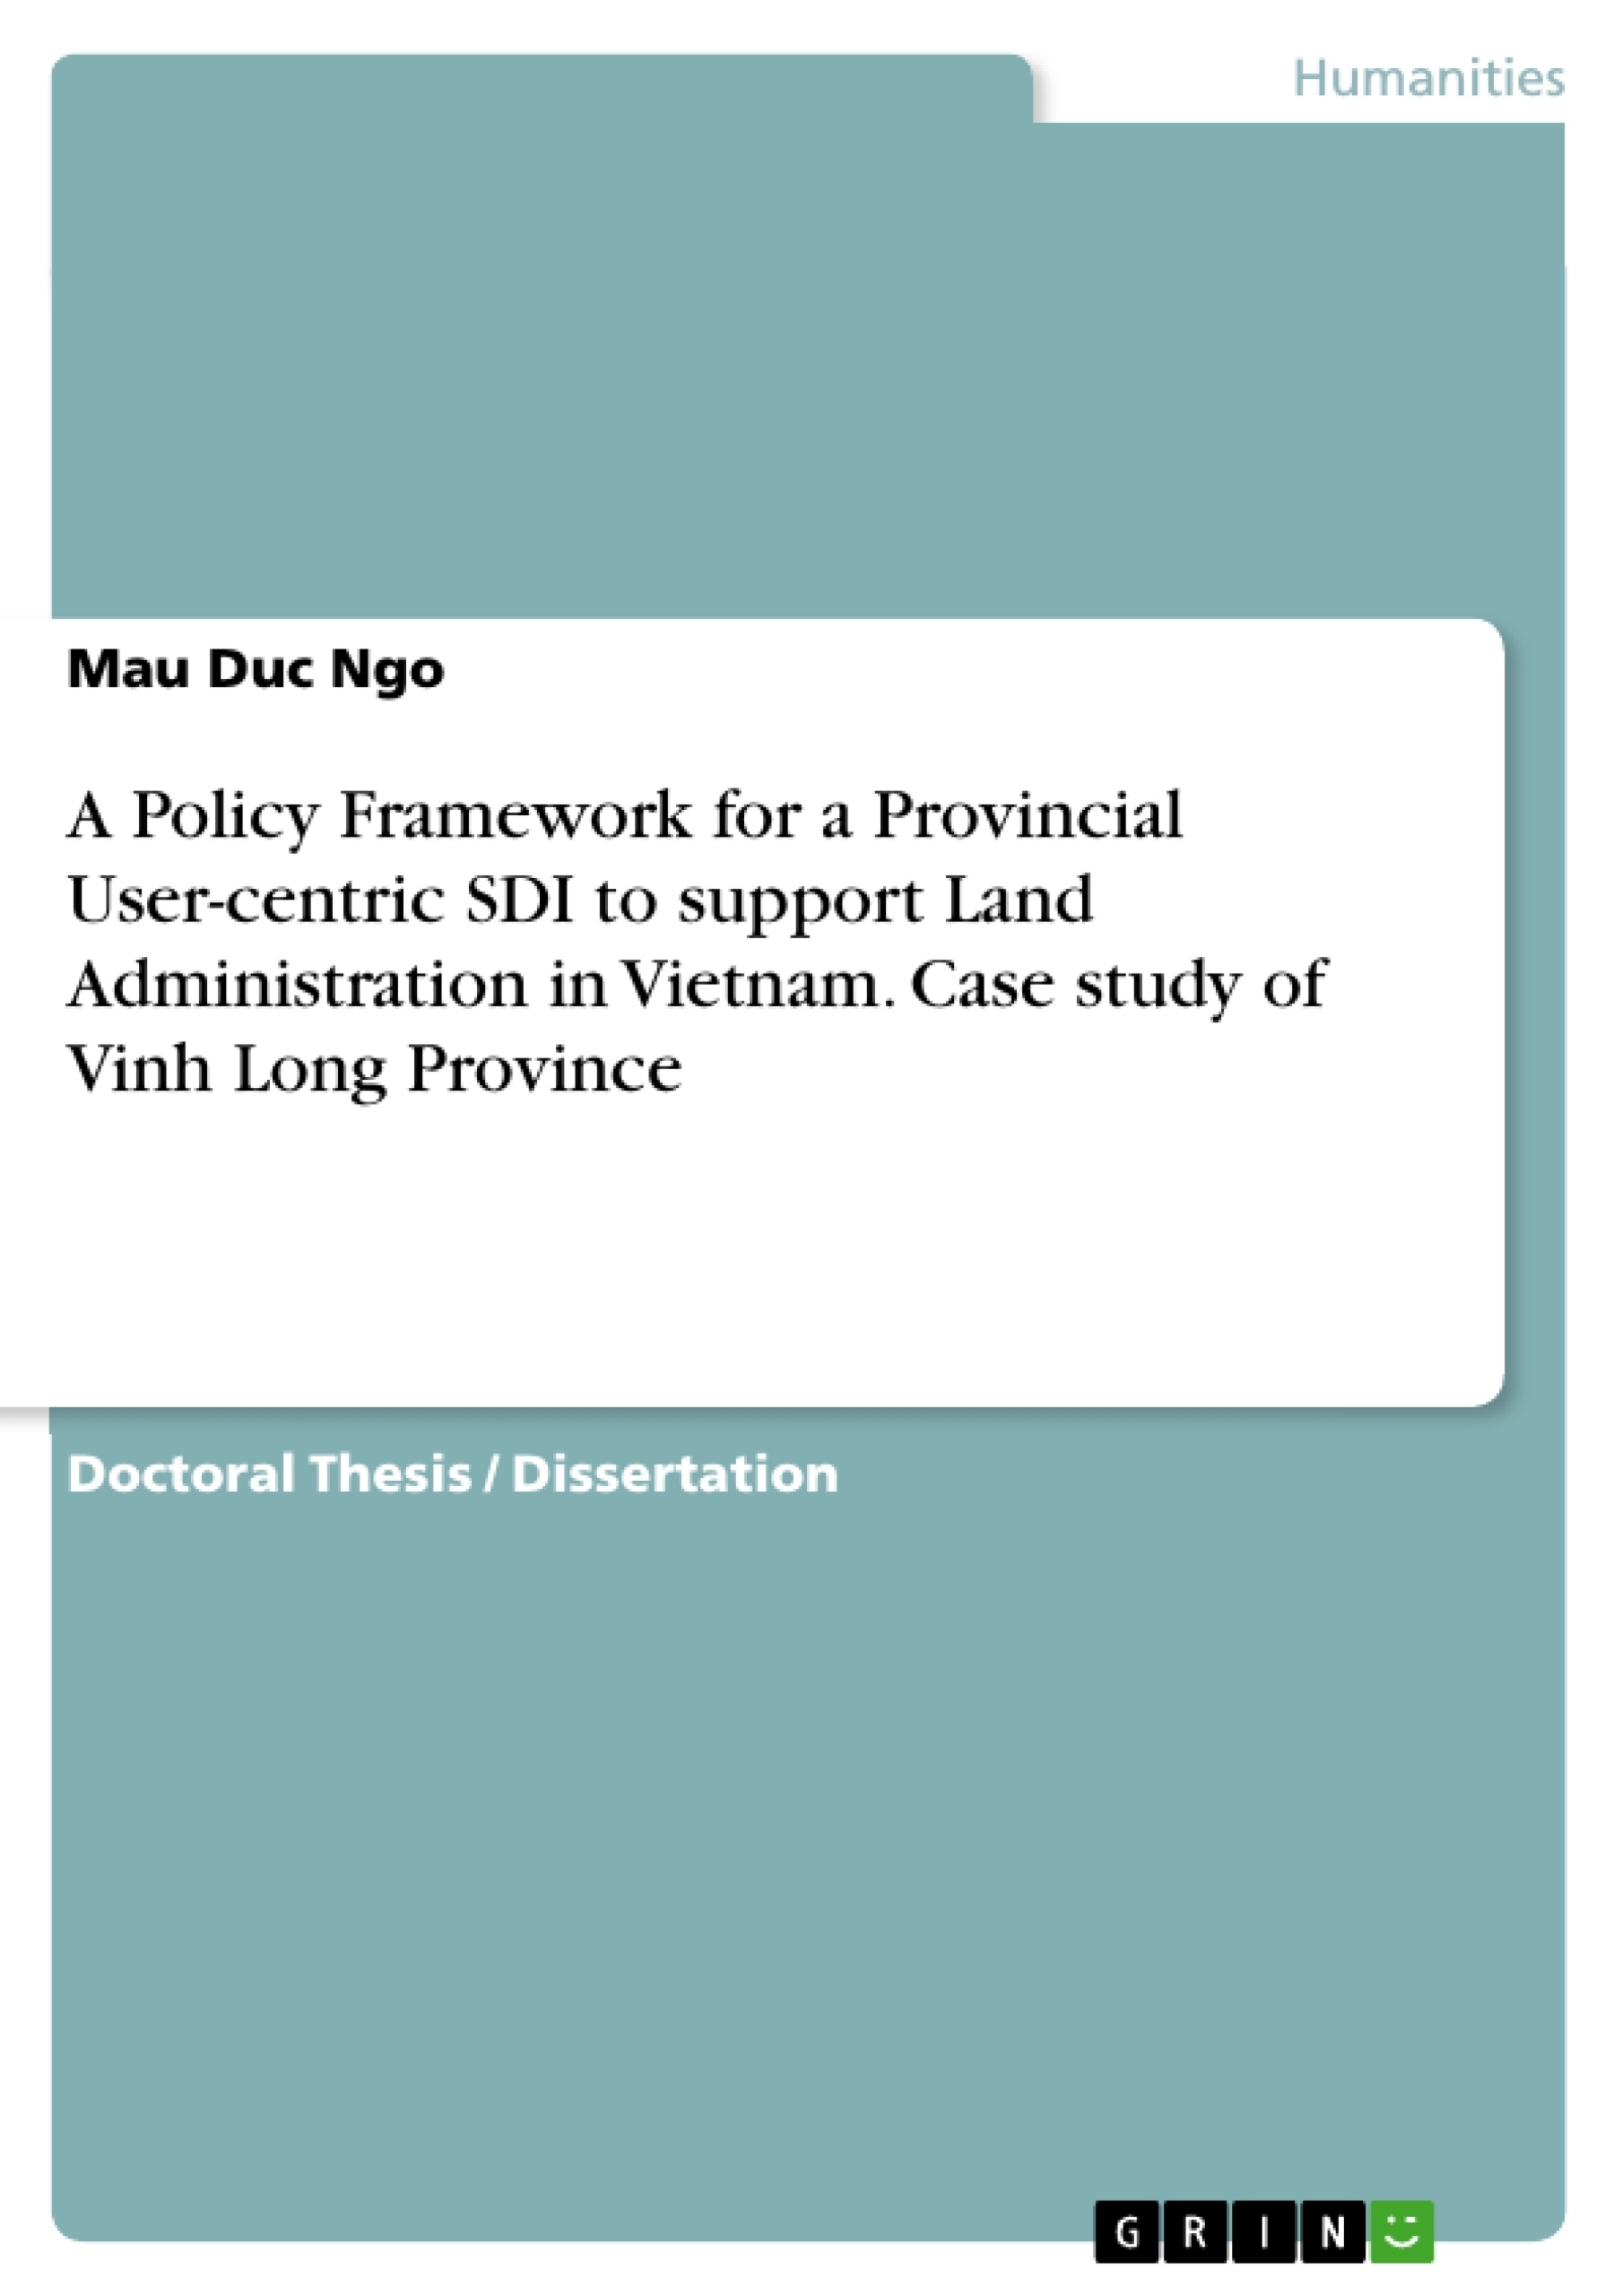 Titre: A Policy Framework for a Provincial User-centric SDI to support Land Administration in Vietnam. Case study of Vinh Long Province